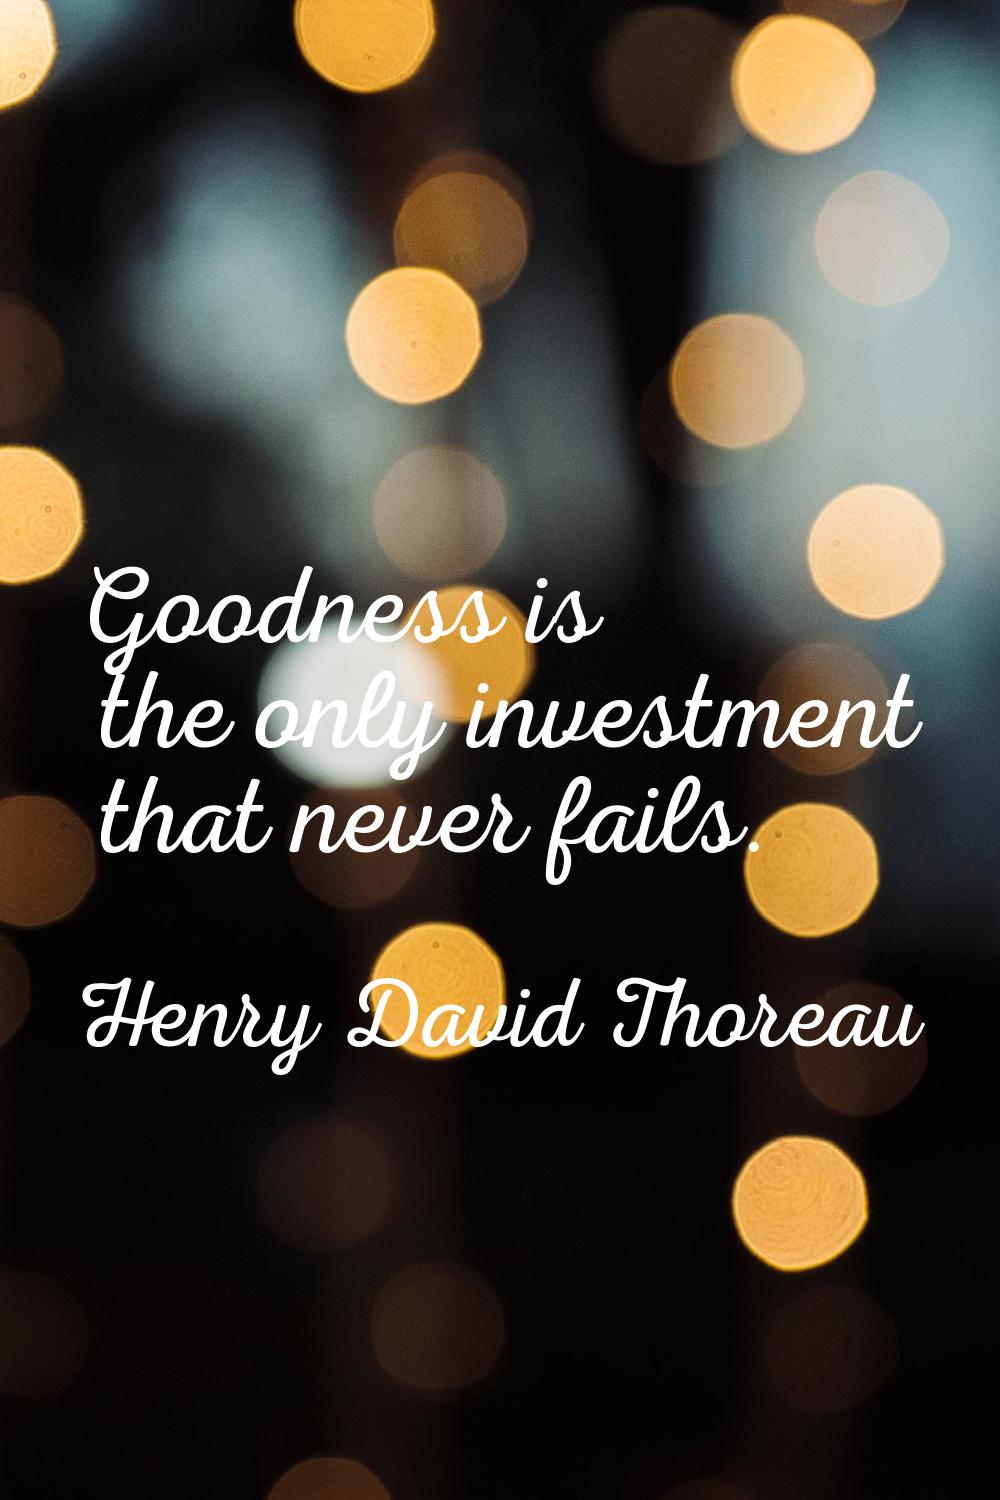 Goodness is the only investment that never fails.